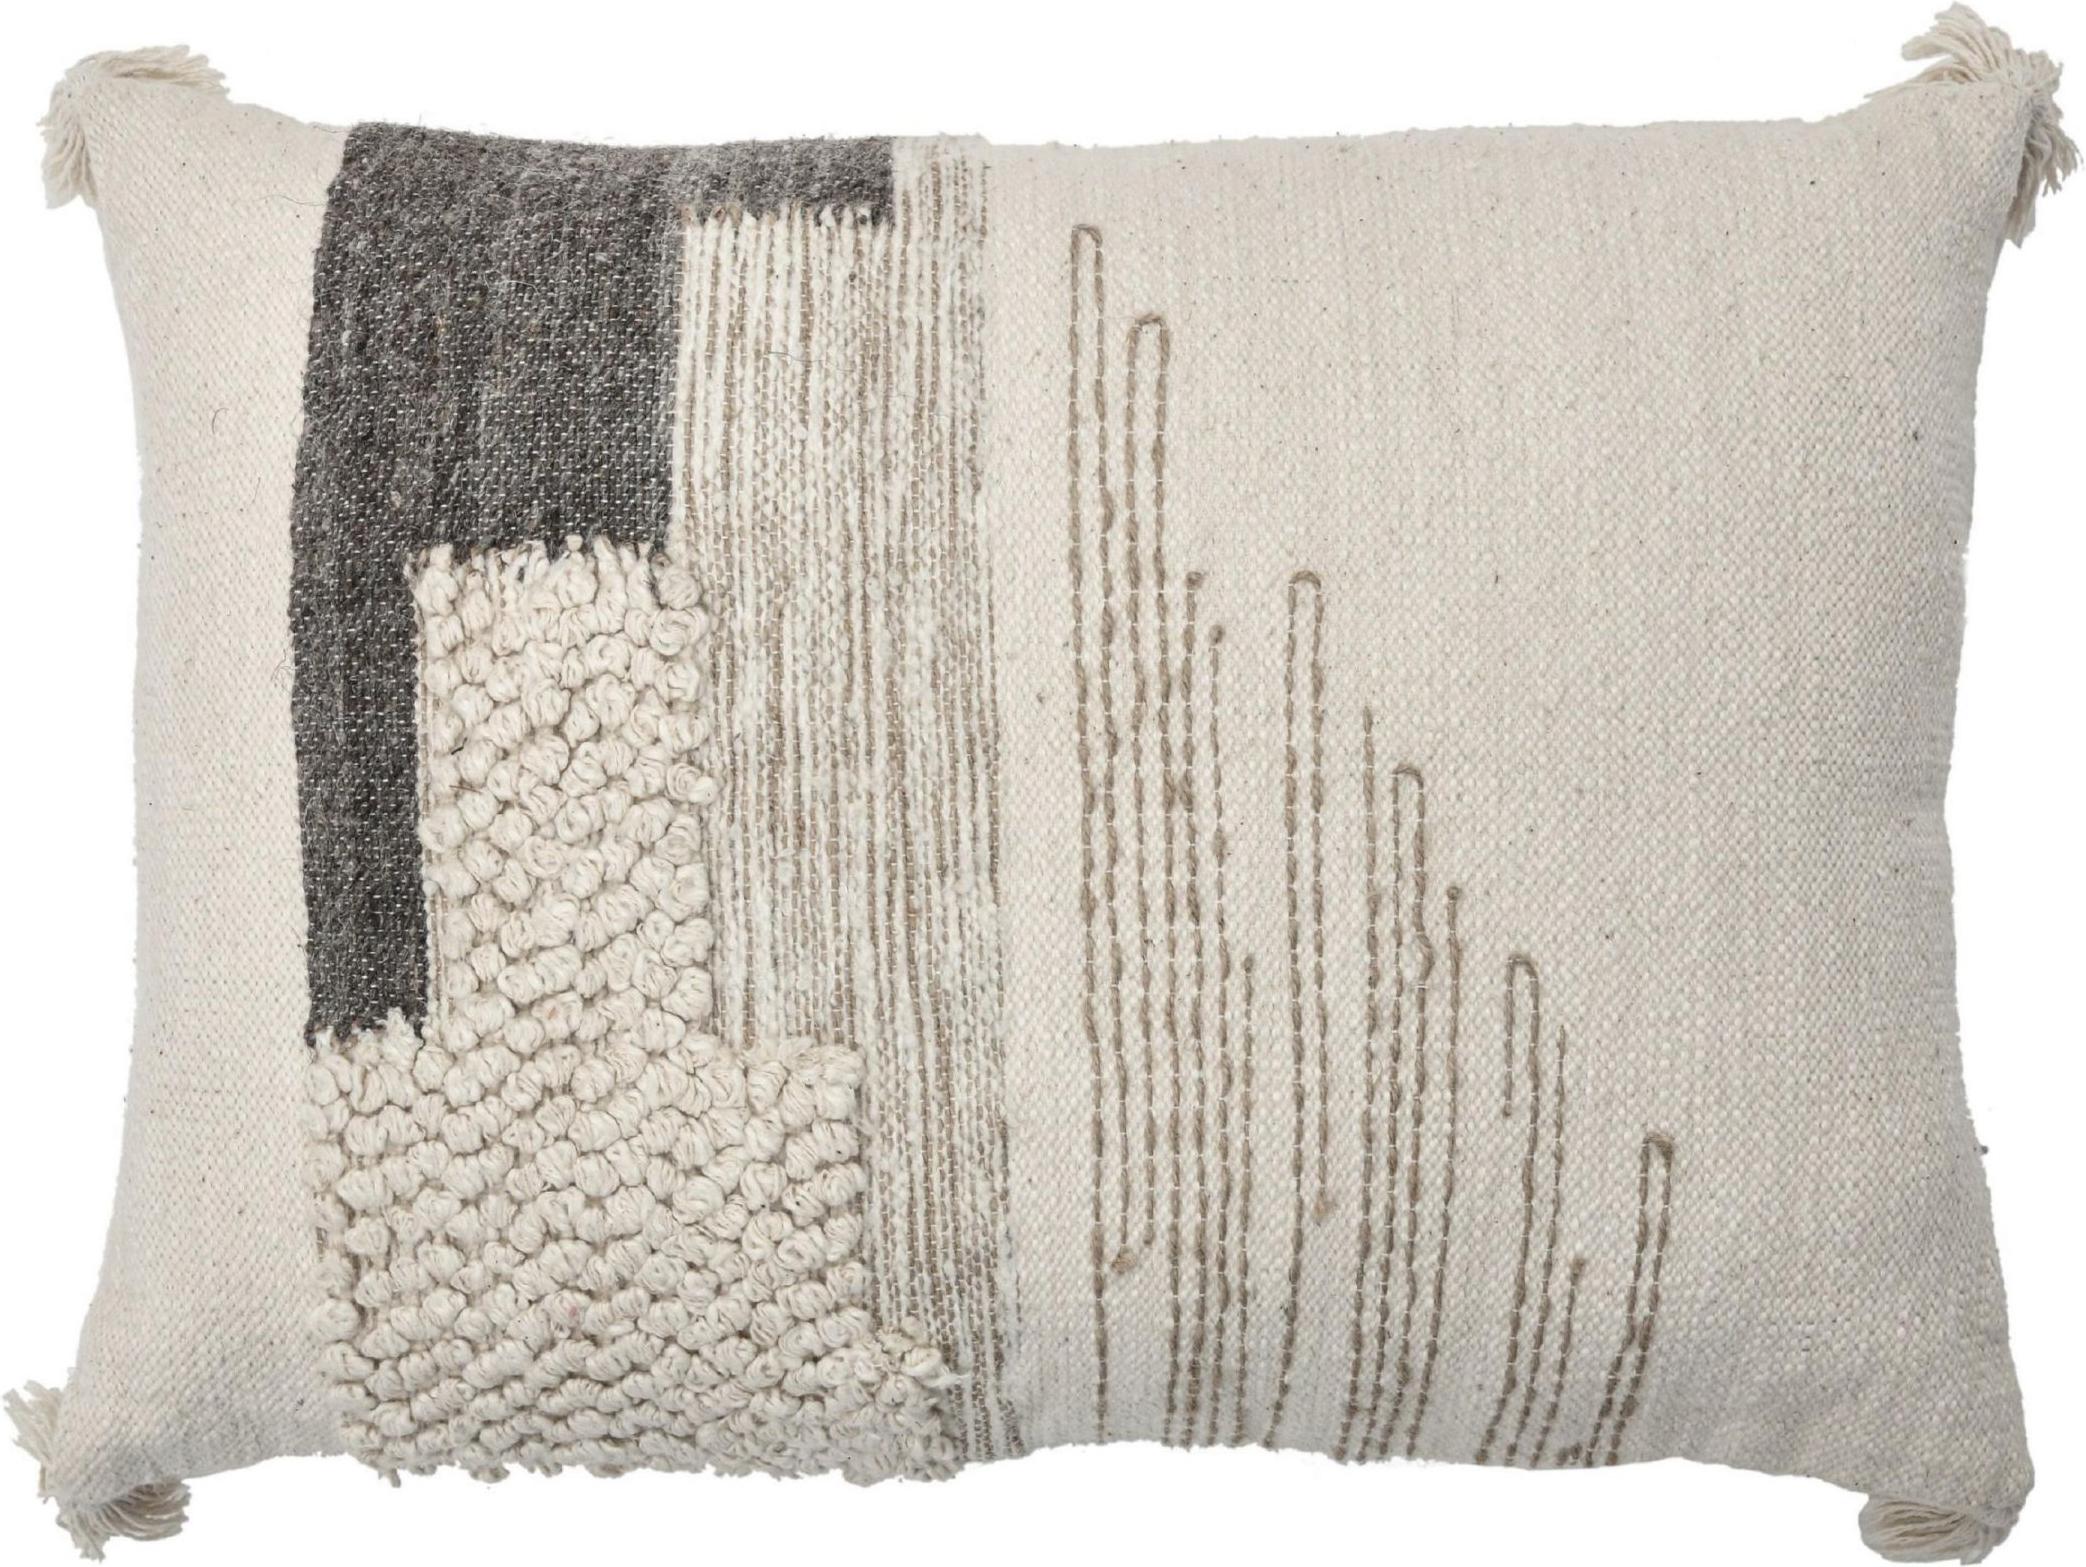 Modern Contemporary Boho Chic Style Wool and Cotton Pillow In Beige For Sale